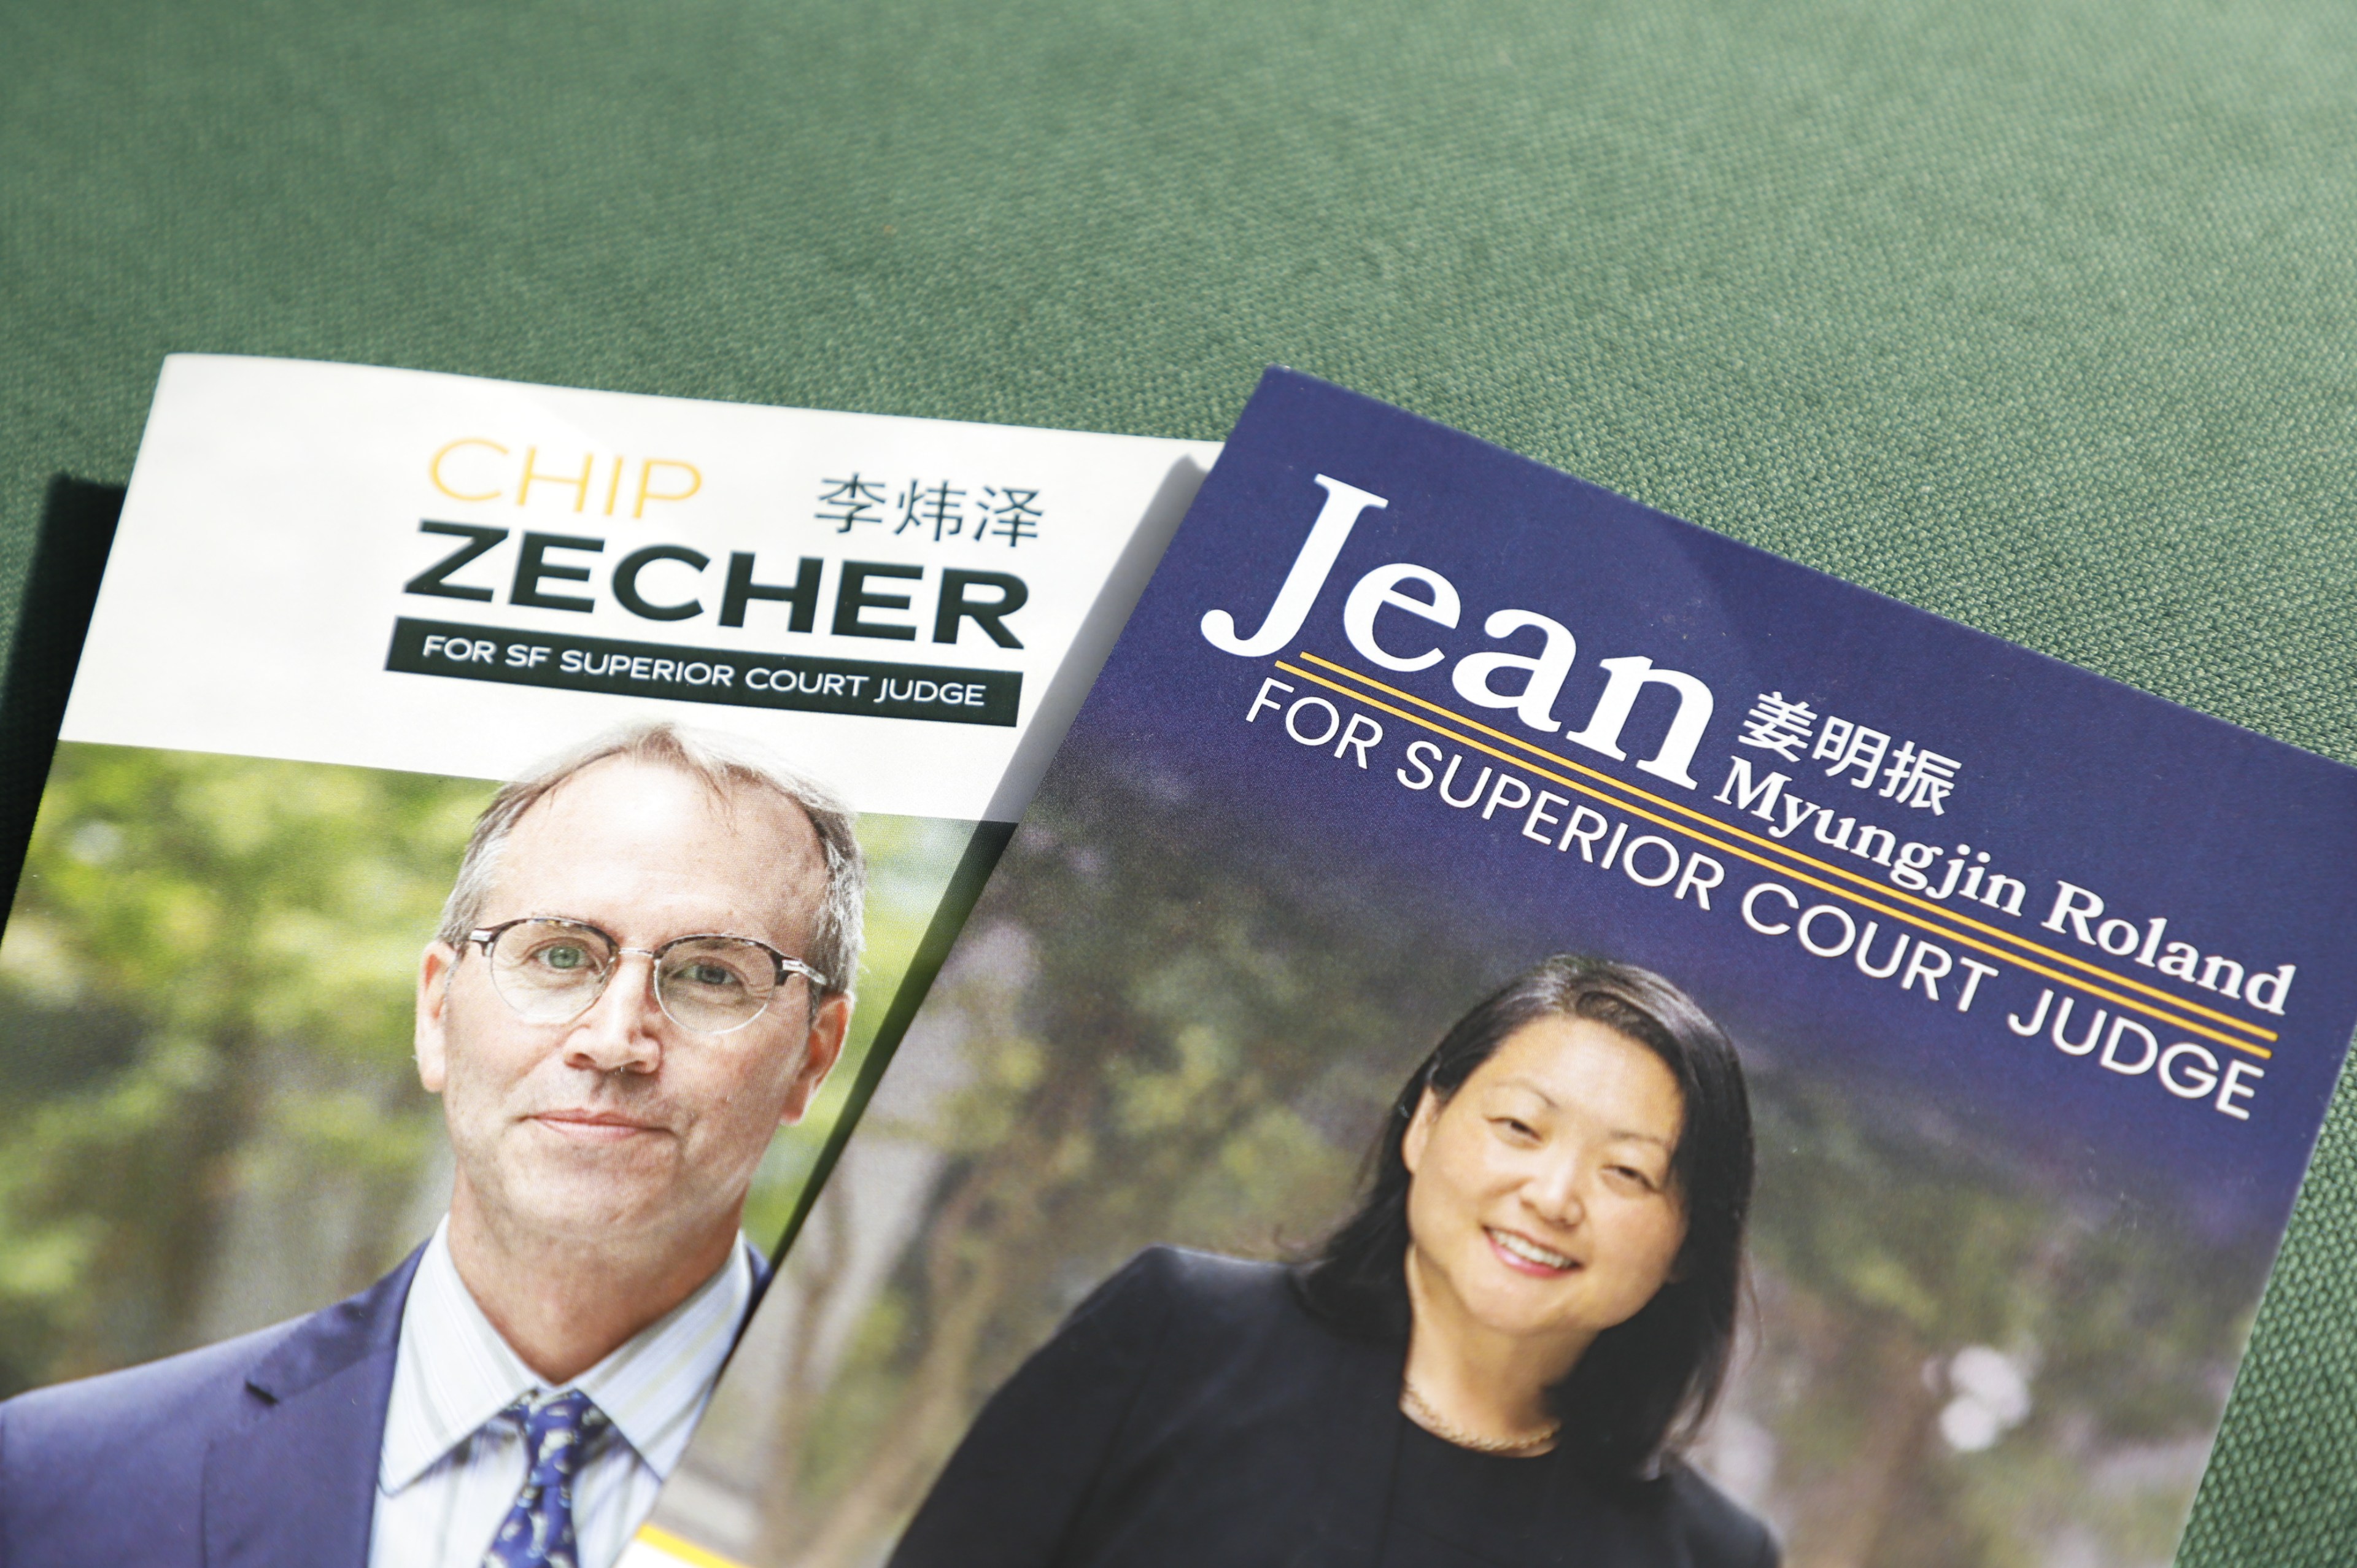 Campaign flyers for SF Superior Court judge candidates Chip Zecher, left, and Jean Myungin Roland have Chinese names next to their English names which has created some controversy.